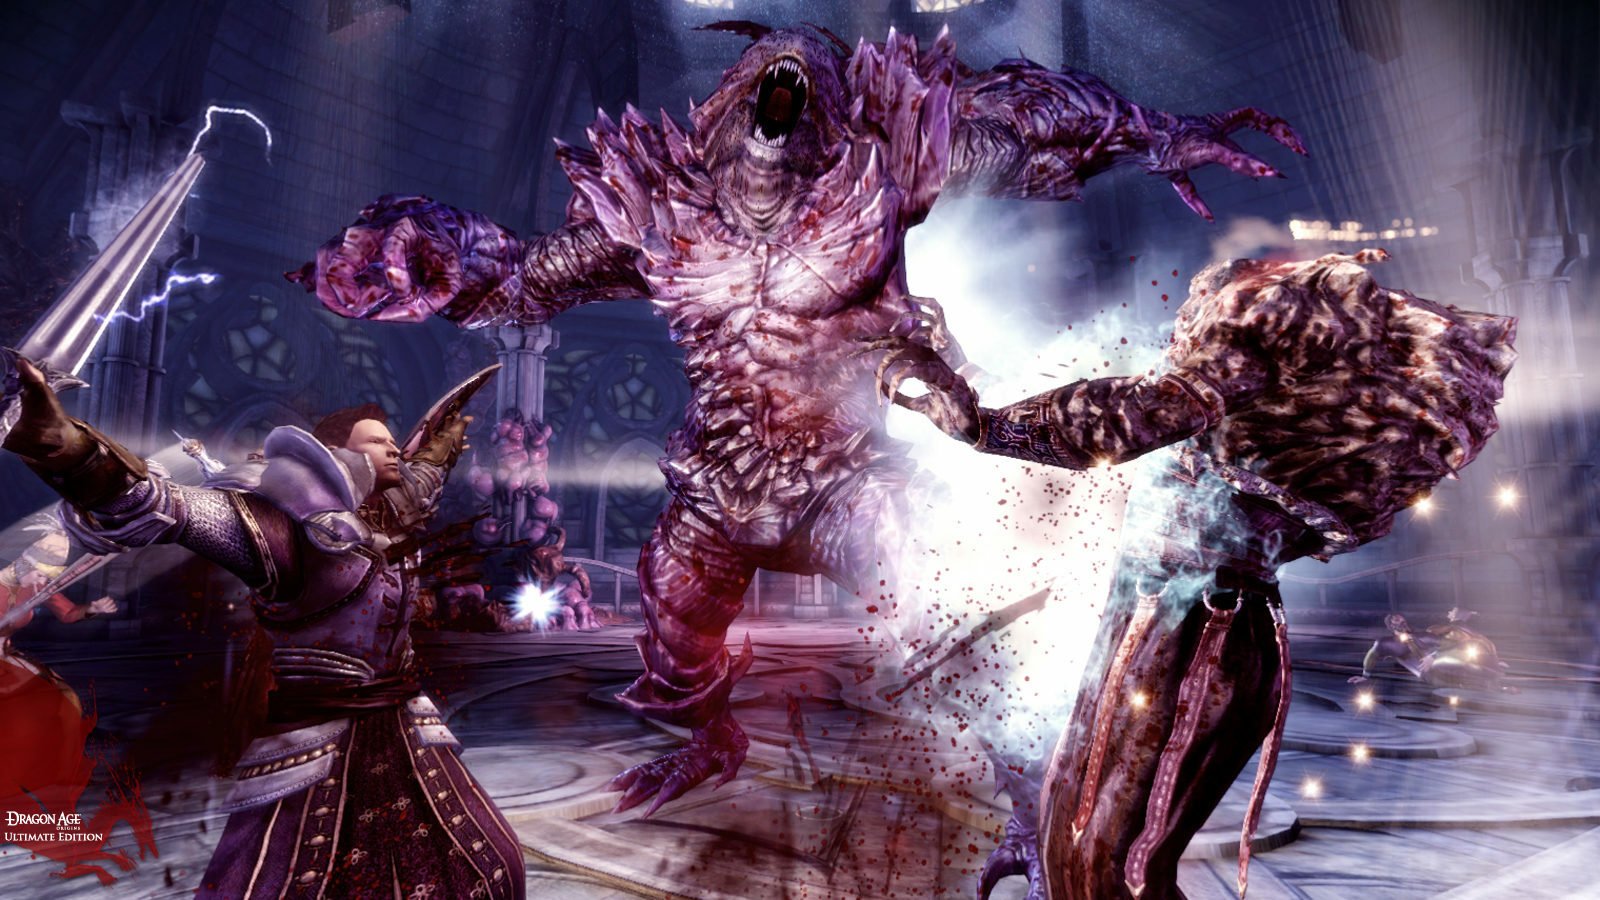 Most Dragon Age and Mass Effect DLC is now free on PC through